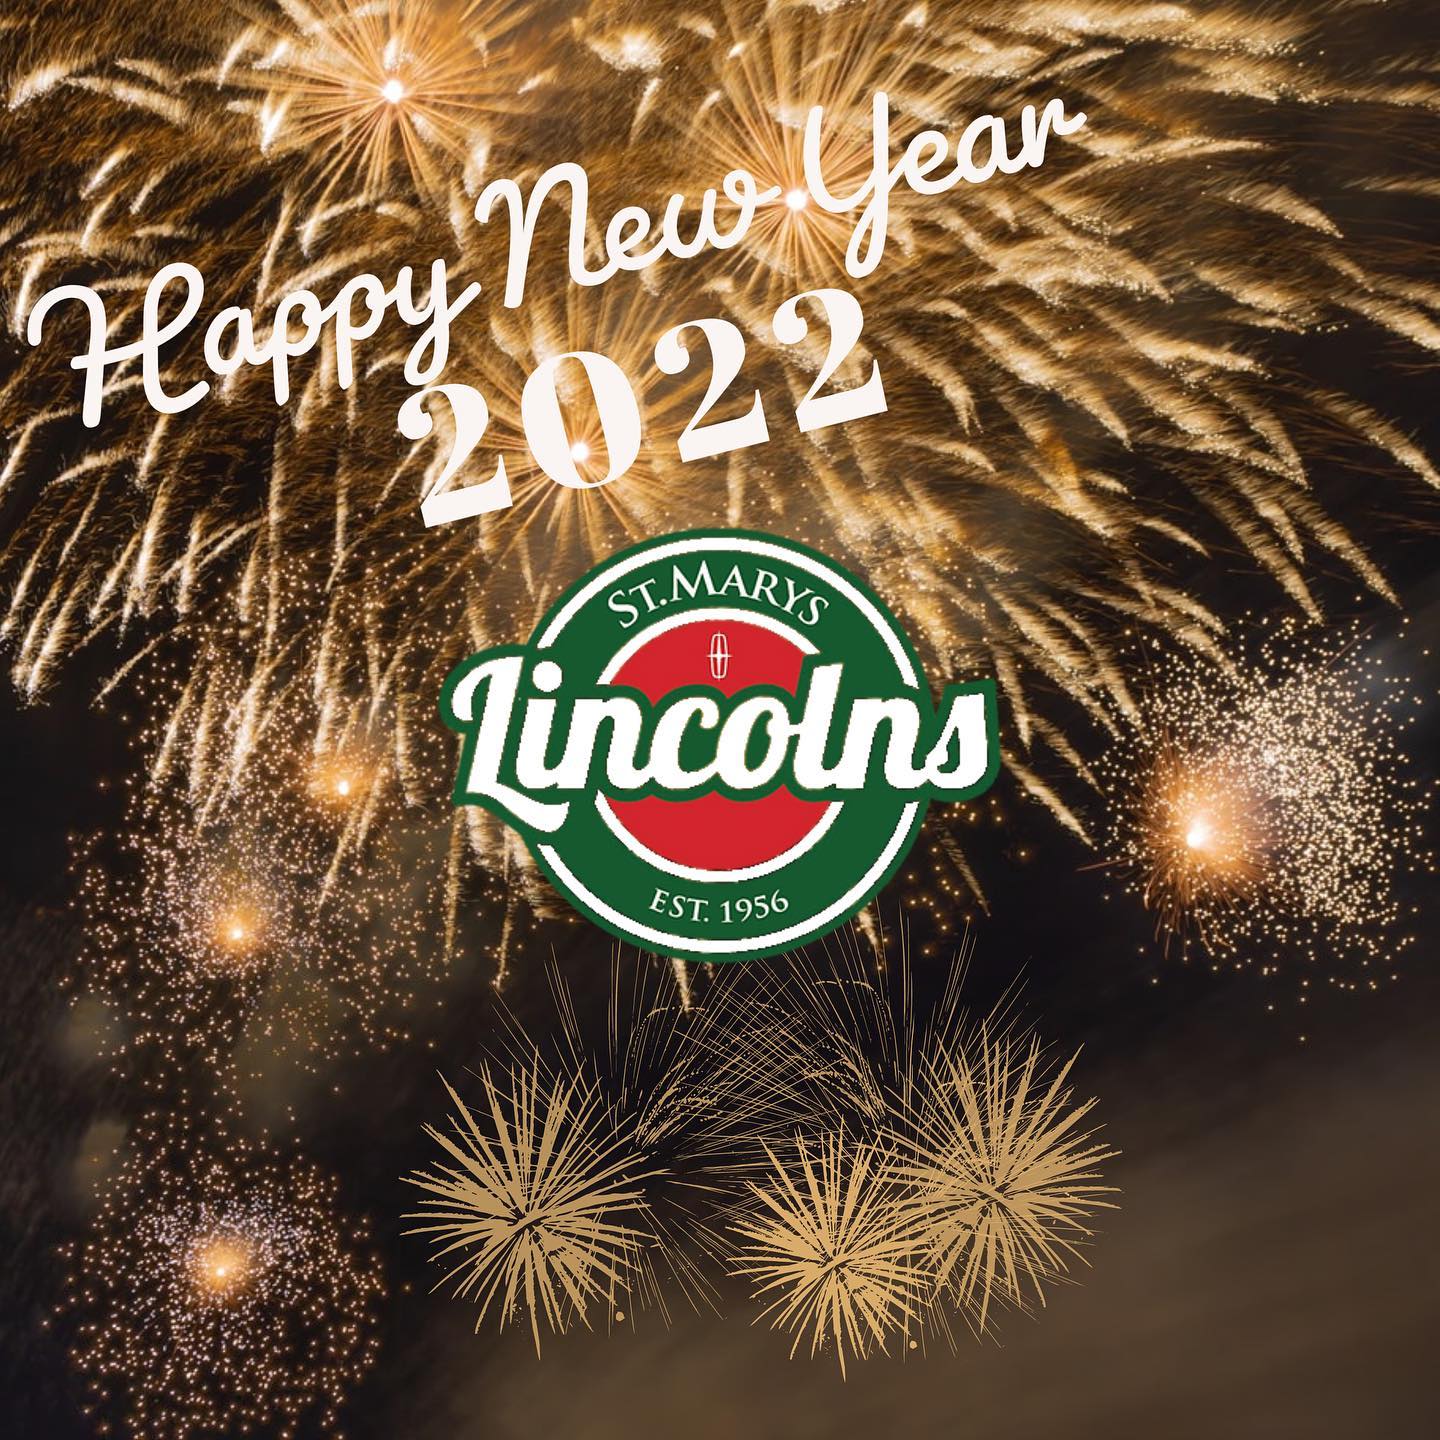 Wishing everyone a Happy New Year from your St. Marys Lincolns! #Stonetown #WeAreLincolns